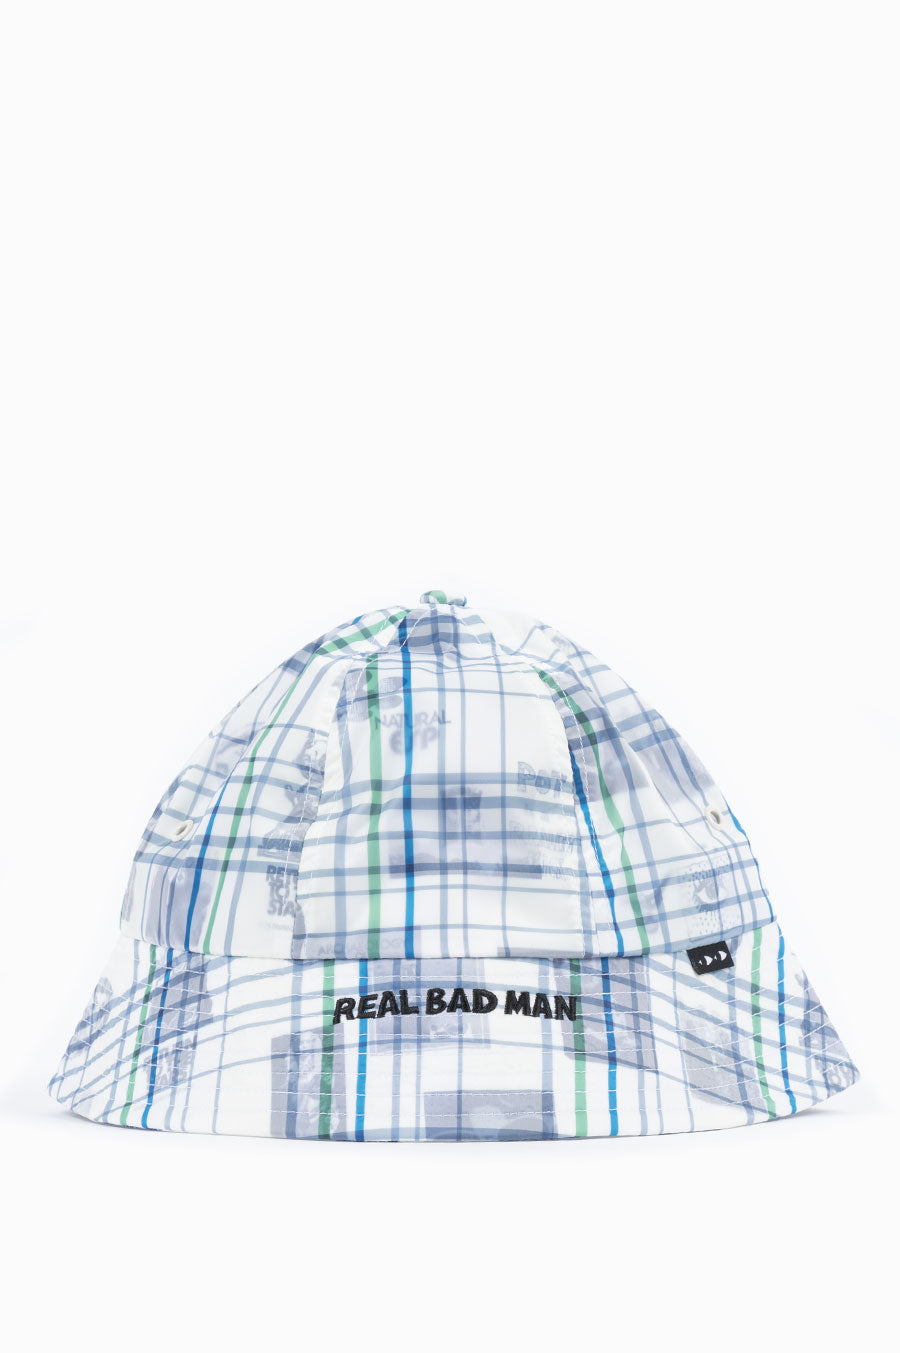 REAL BAD MAN DOUBLE VISION BUCKET HAT MULTI